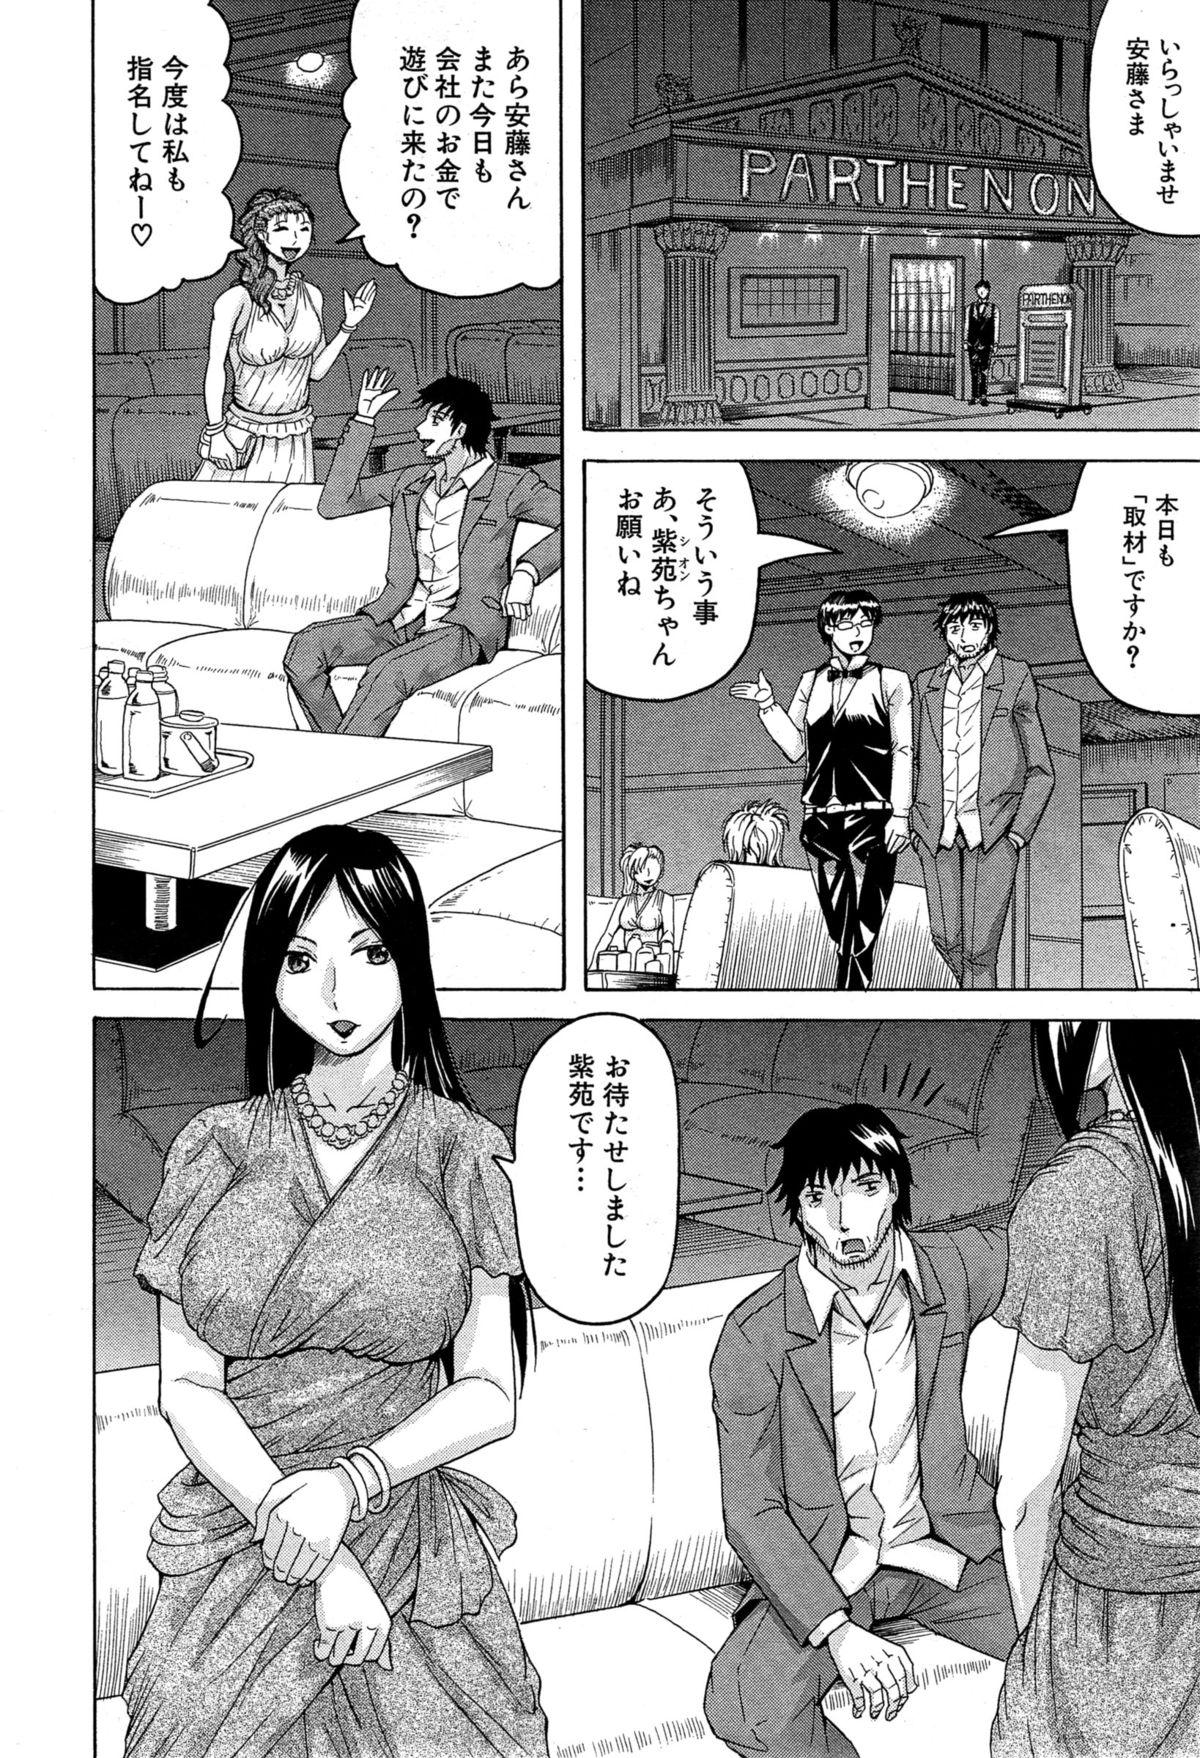 18 Year Old Porn Kanzai Toshi Ch. 1-4 Chicks - Page 8